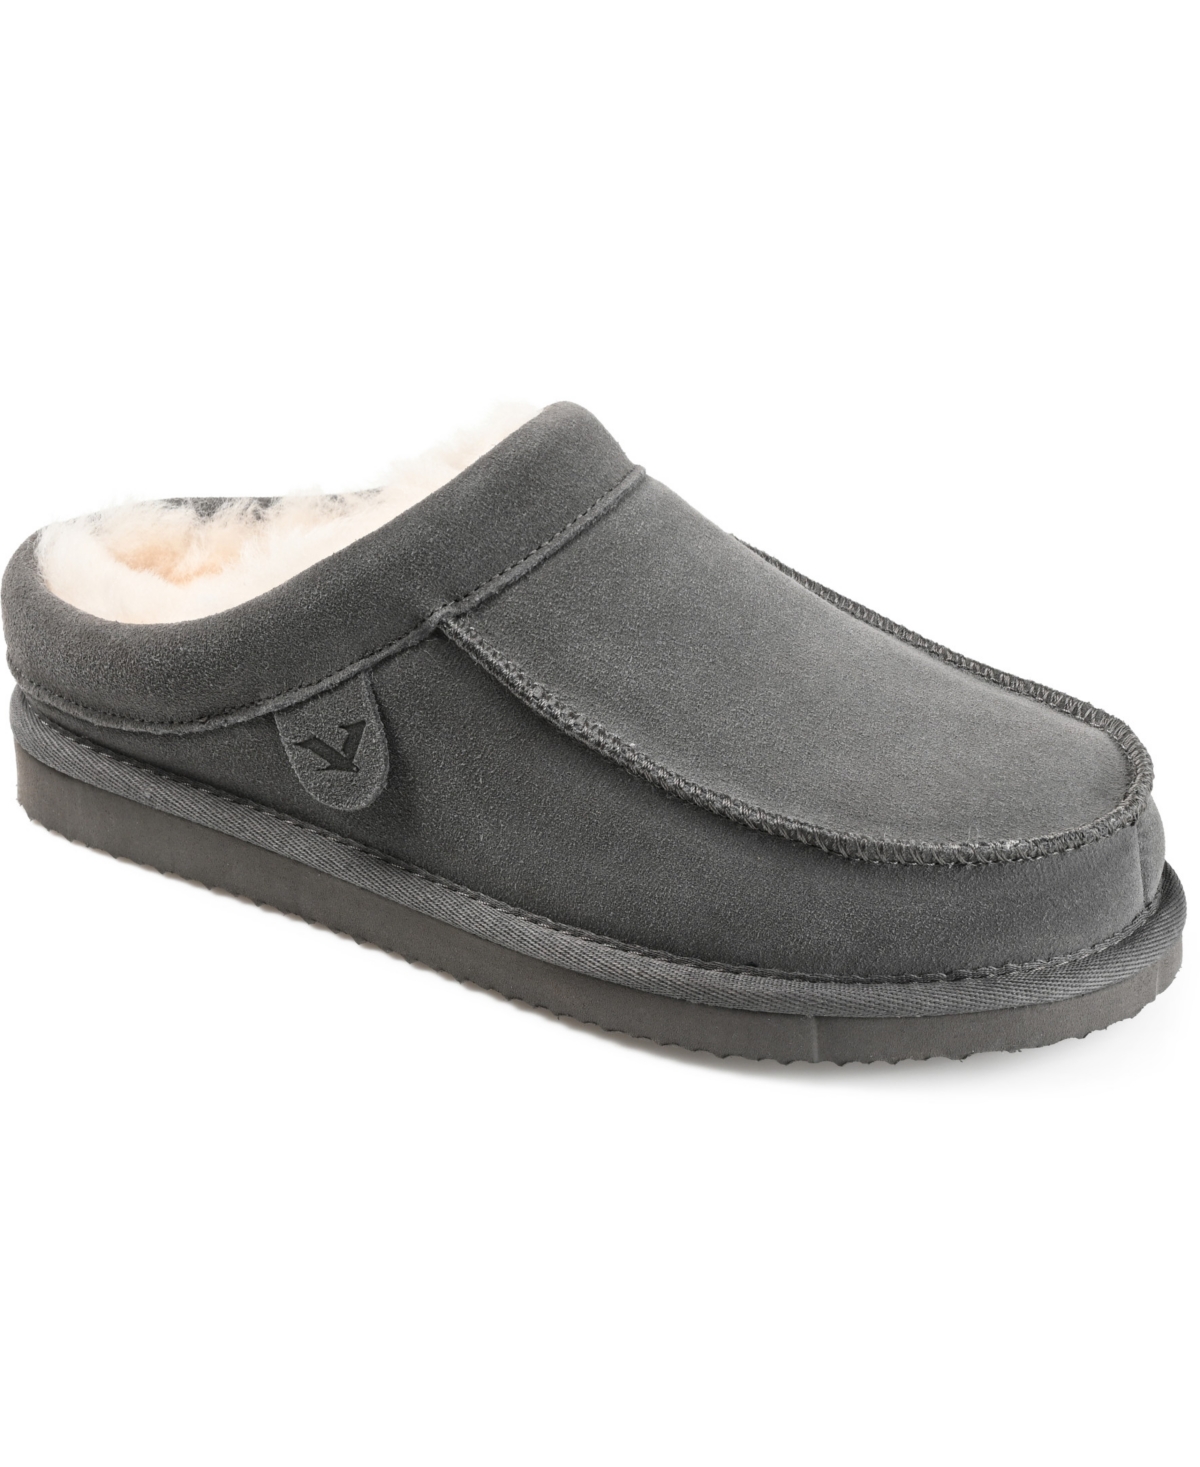 Men's Oasis Moccasin Clog Slippers - Gray